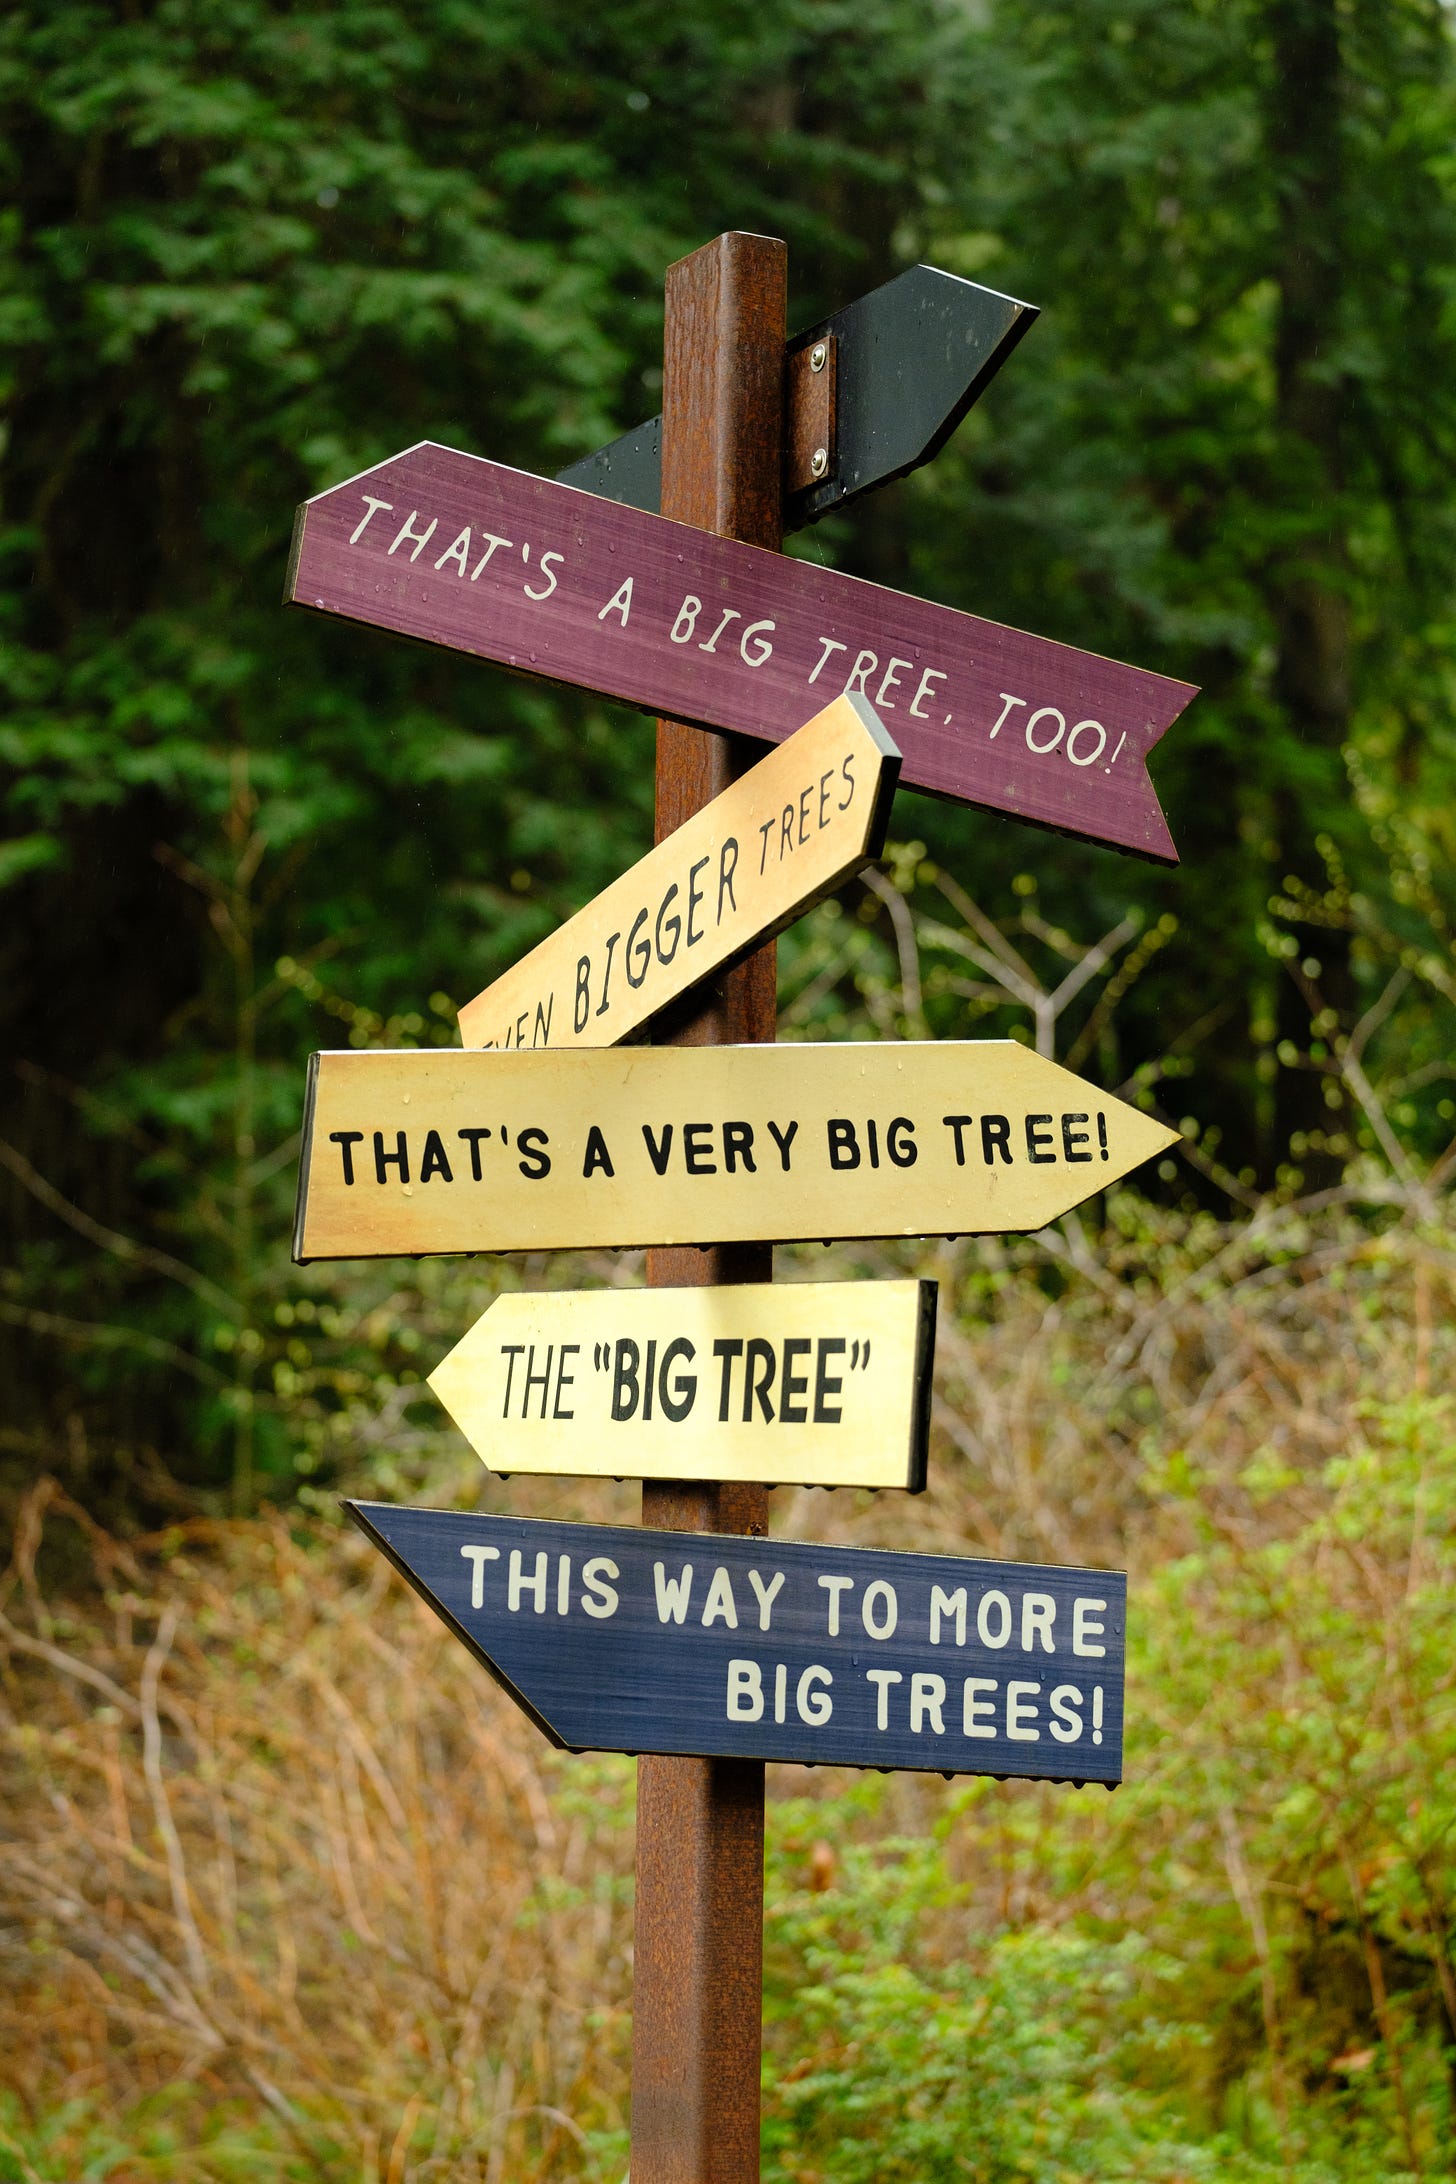 Signs in Redwoods National Park joke about the size of the trees, with sayings like "This way to big trees," and "that's a big tree, too!"